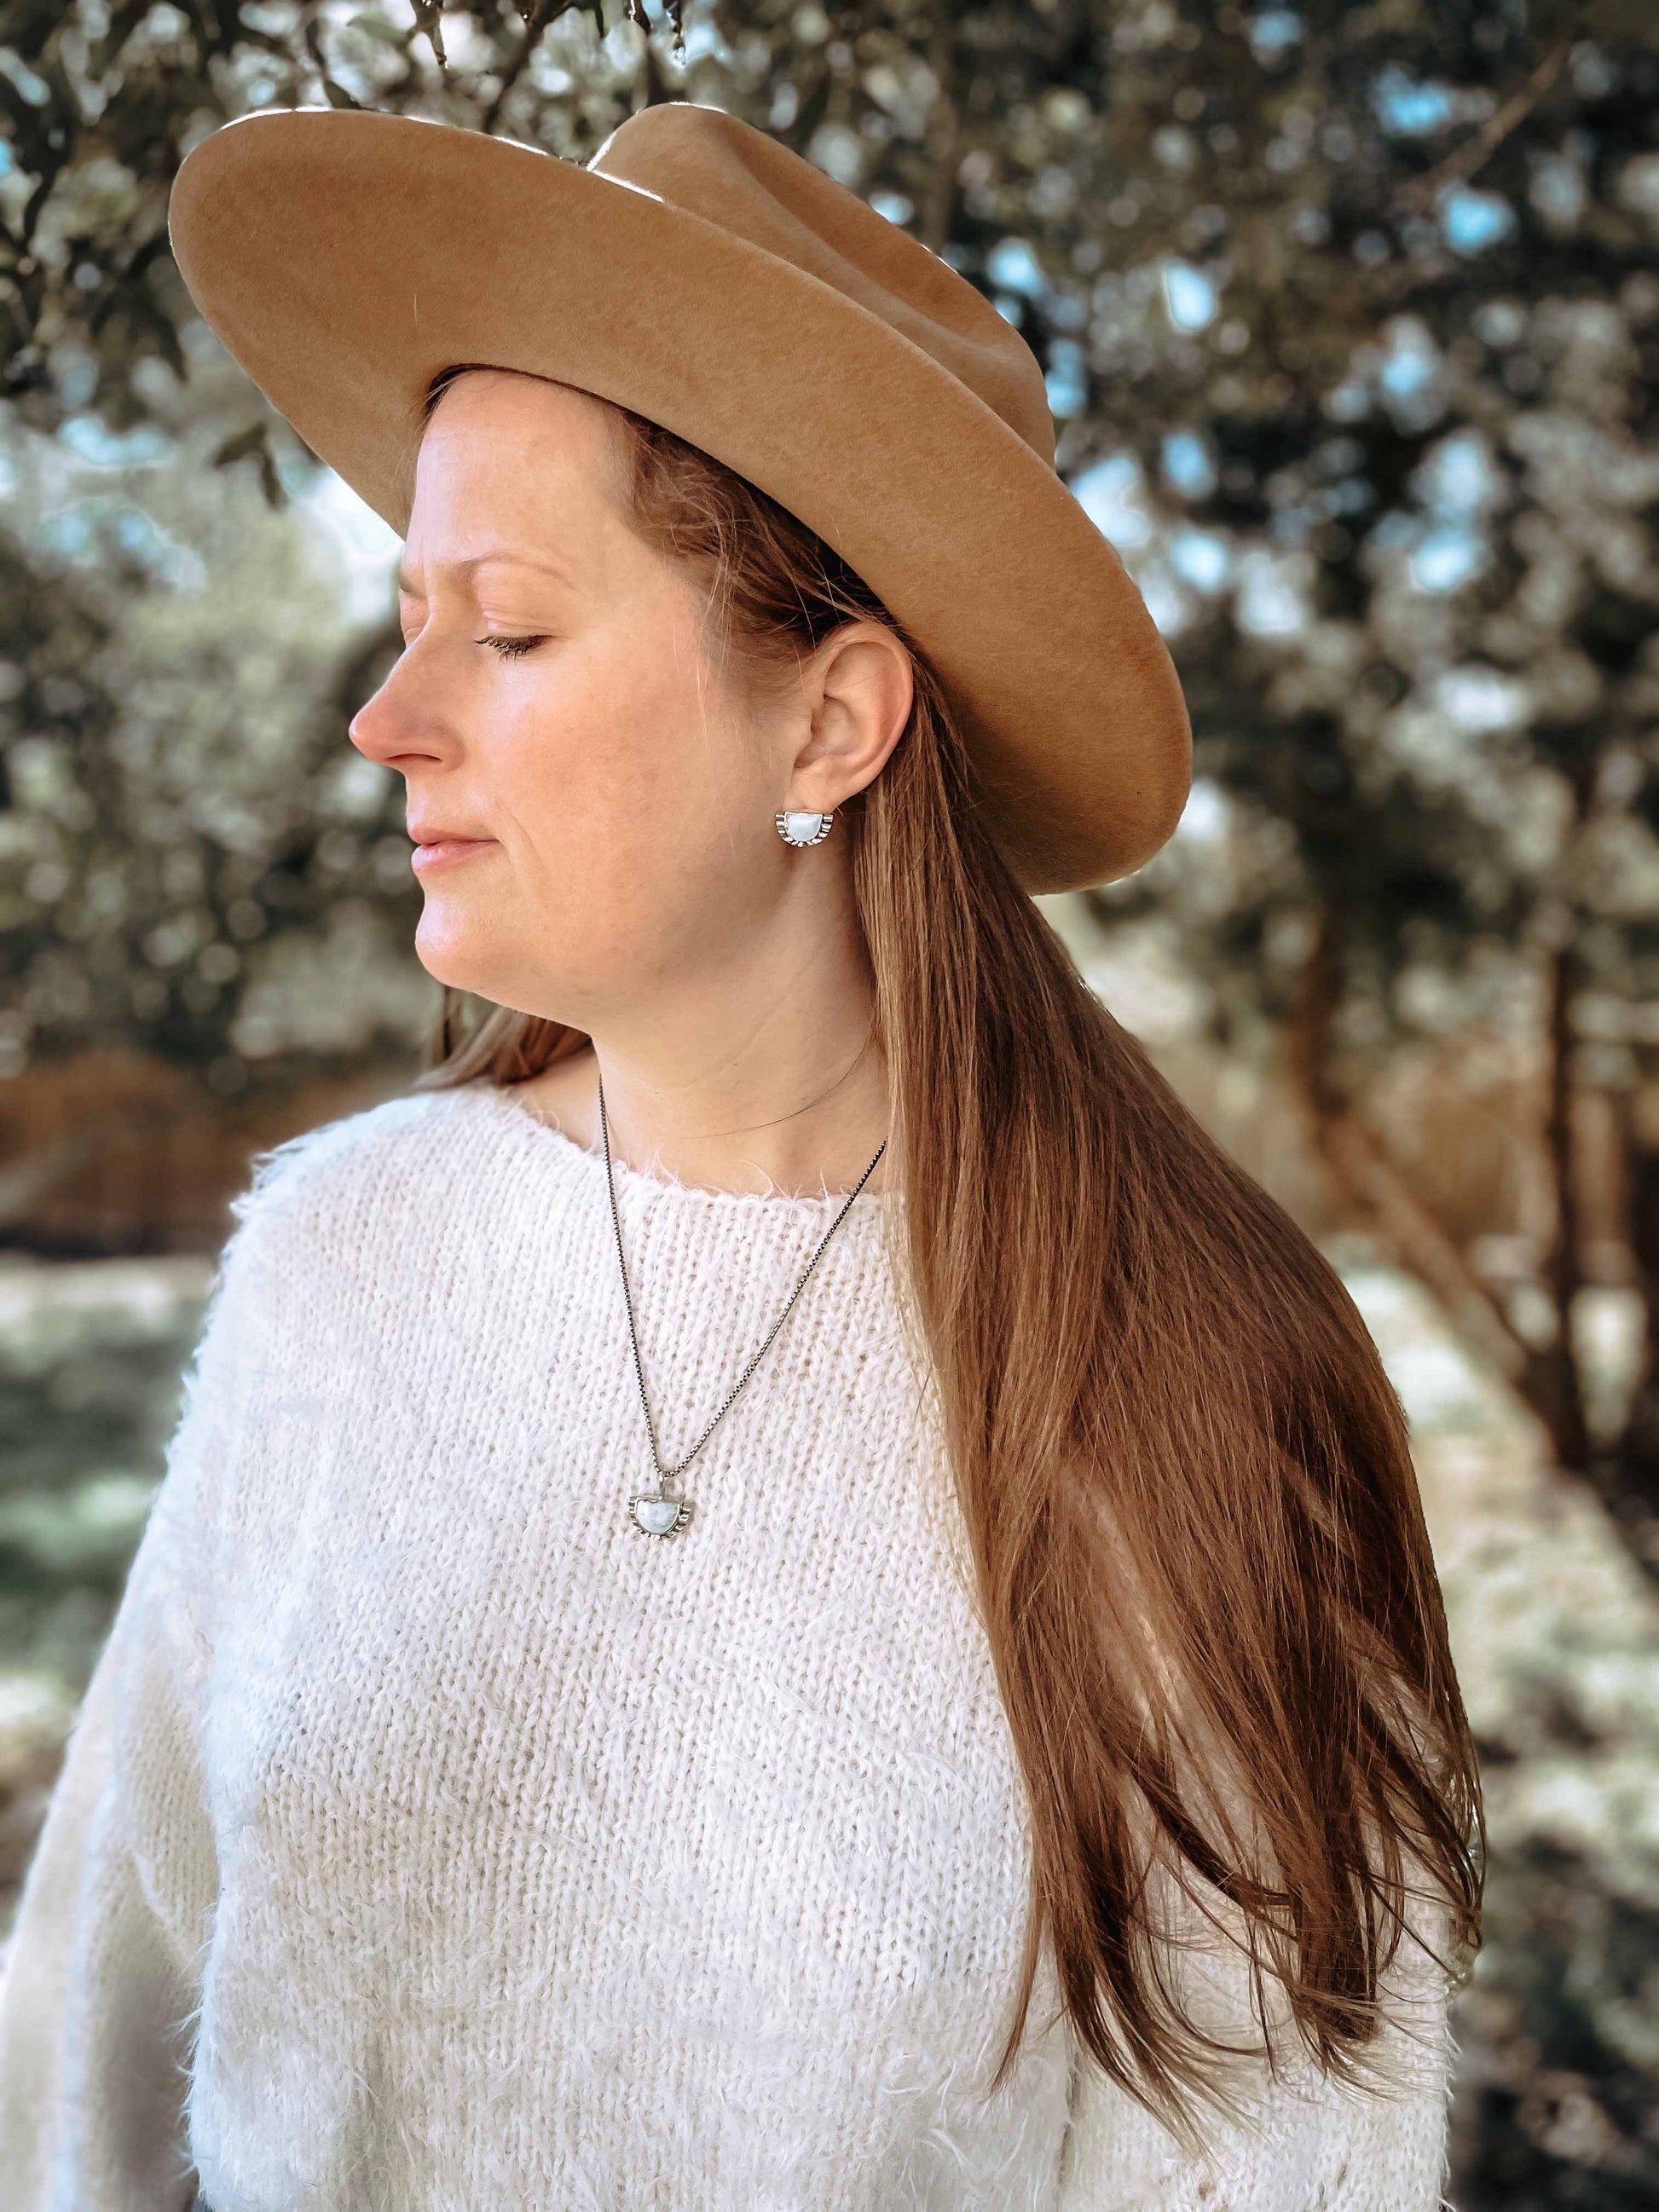 Woman with white sweater and brown western hat outdoors in natural light wearing half moon pale blue turquoise stud earring in ear with matching sterling silver necklace.